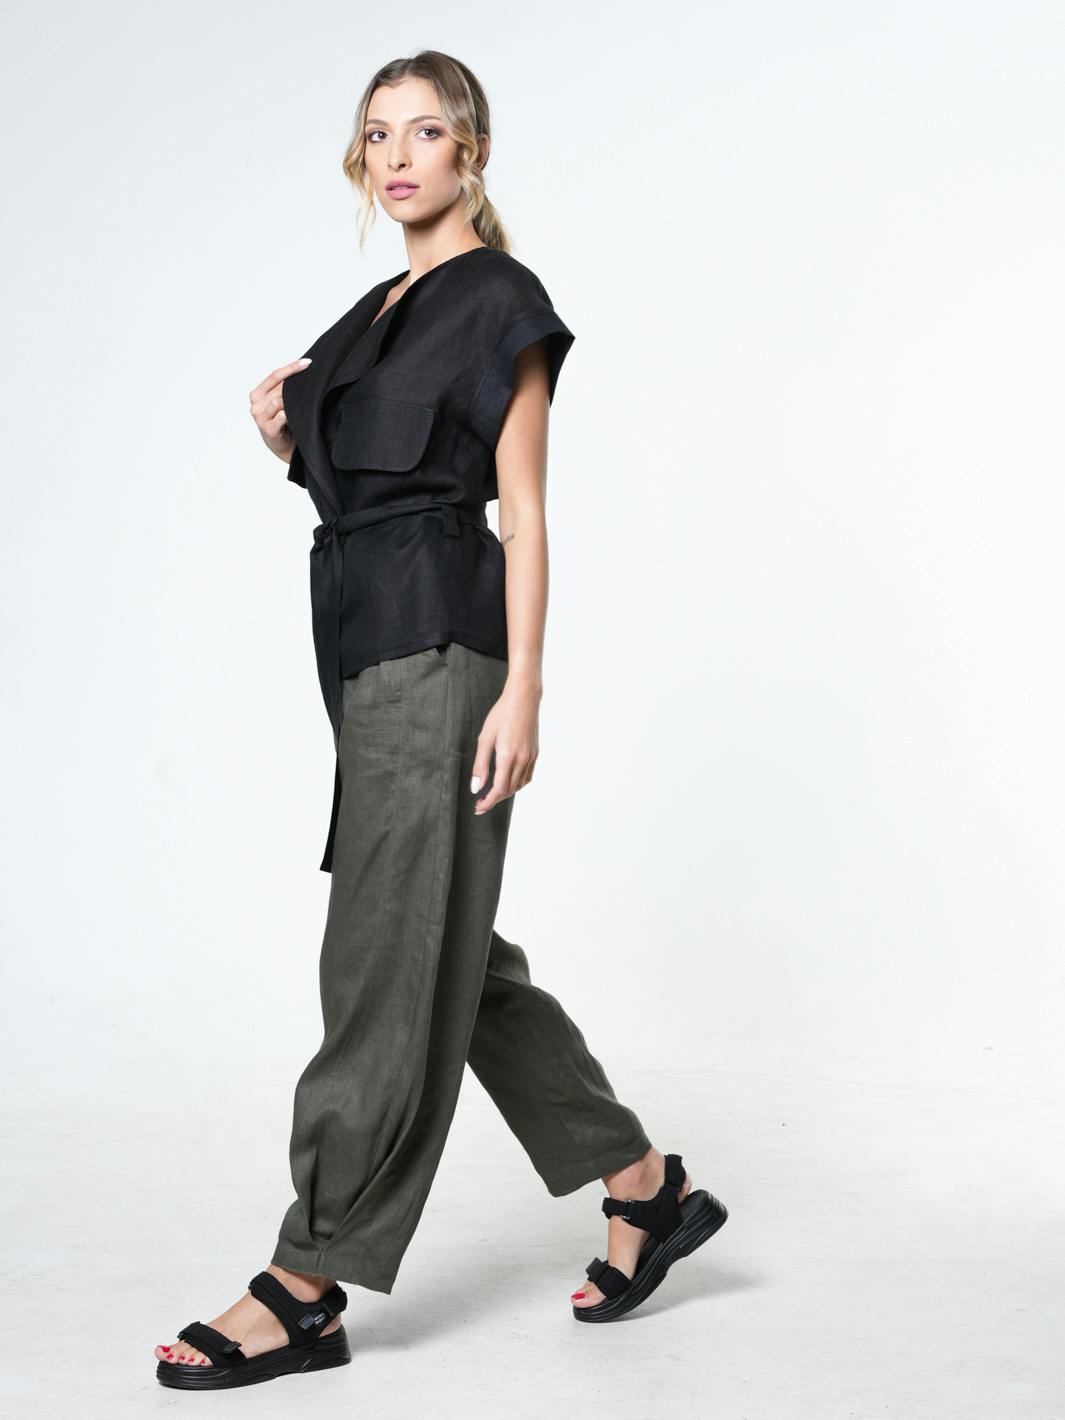 Thumbnail preview #2 for Belted Linen Wrap Top